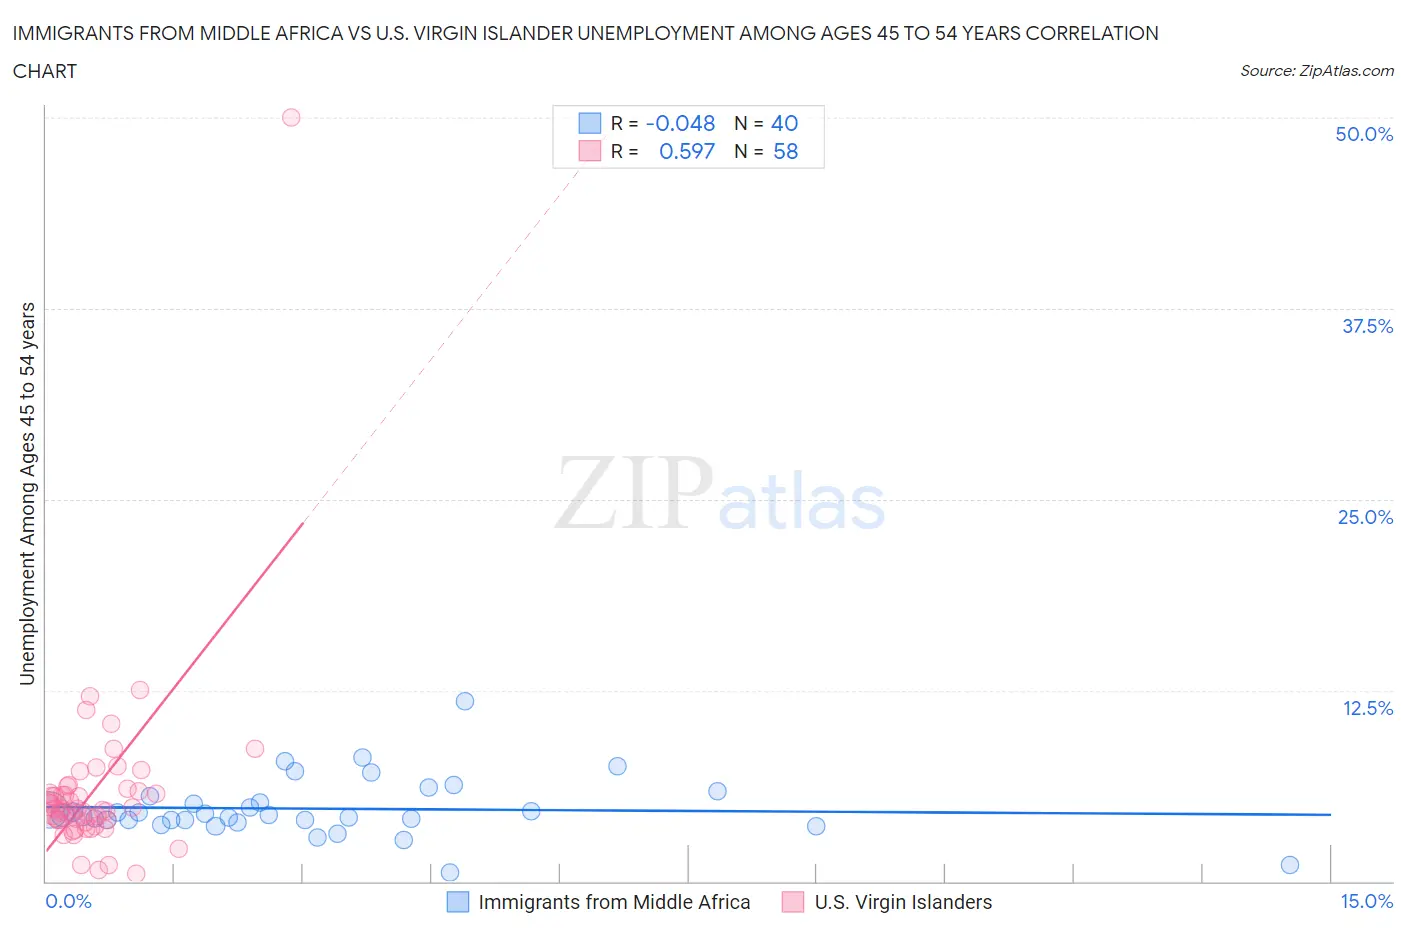 Immigrants from Middle Africa vs U.S. Virgin Islander Unemployment Among Ages 45 to 54 years